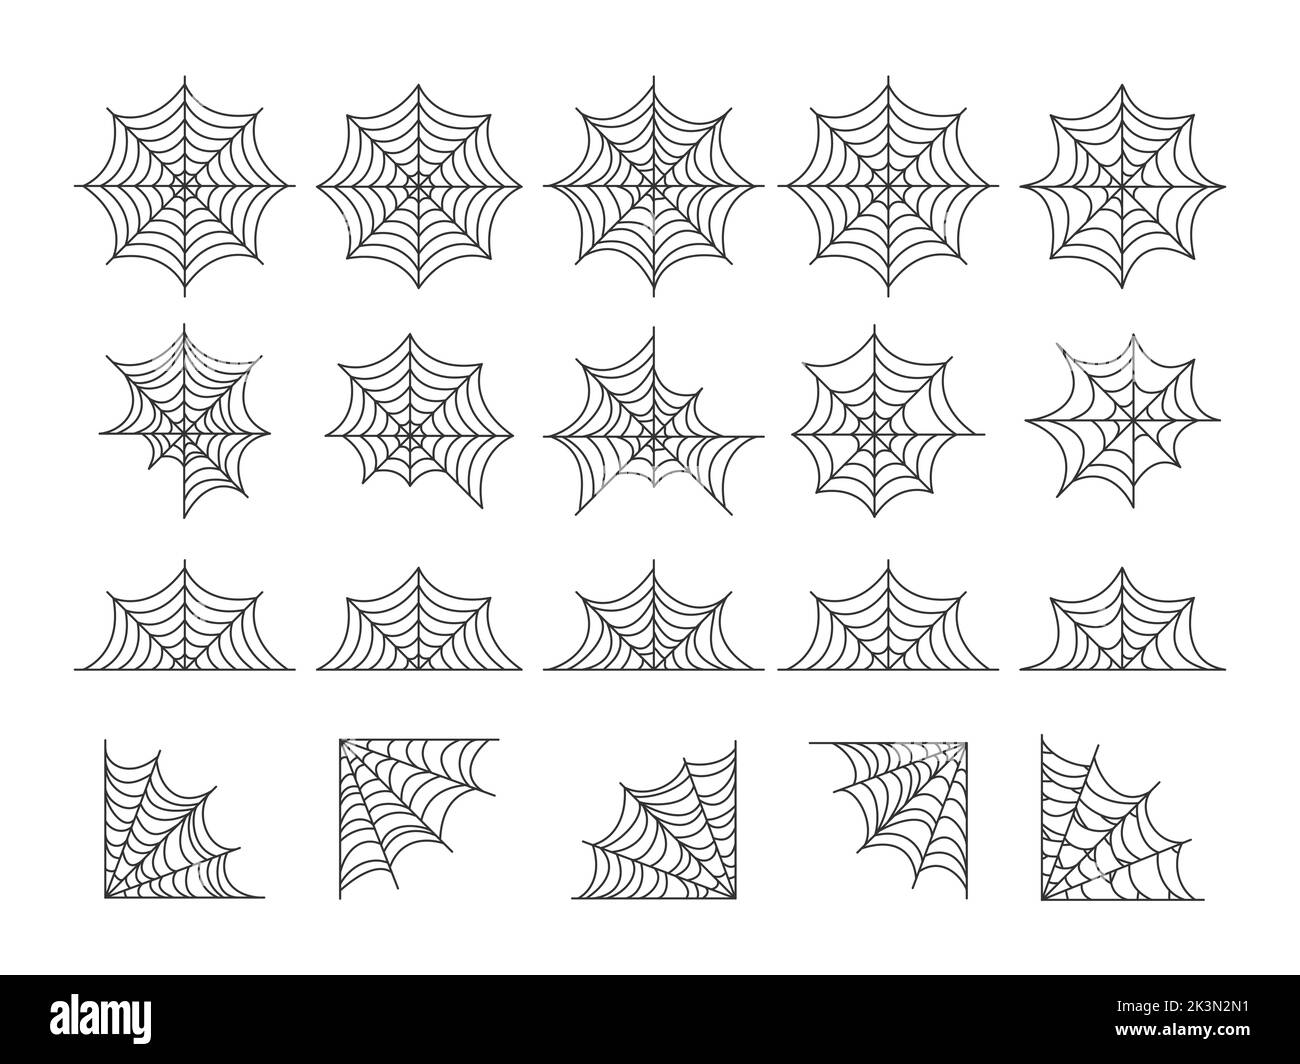 Spider web set. Halloween hand drawn cobweb collection. Vector illustration isolated on white. Stock Vector